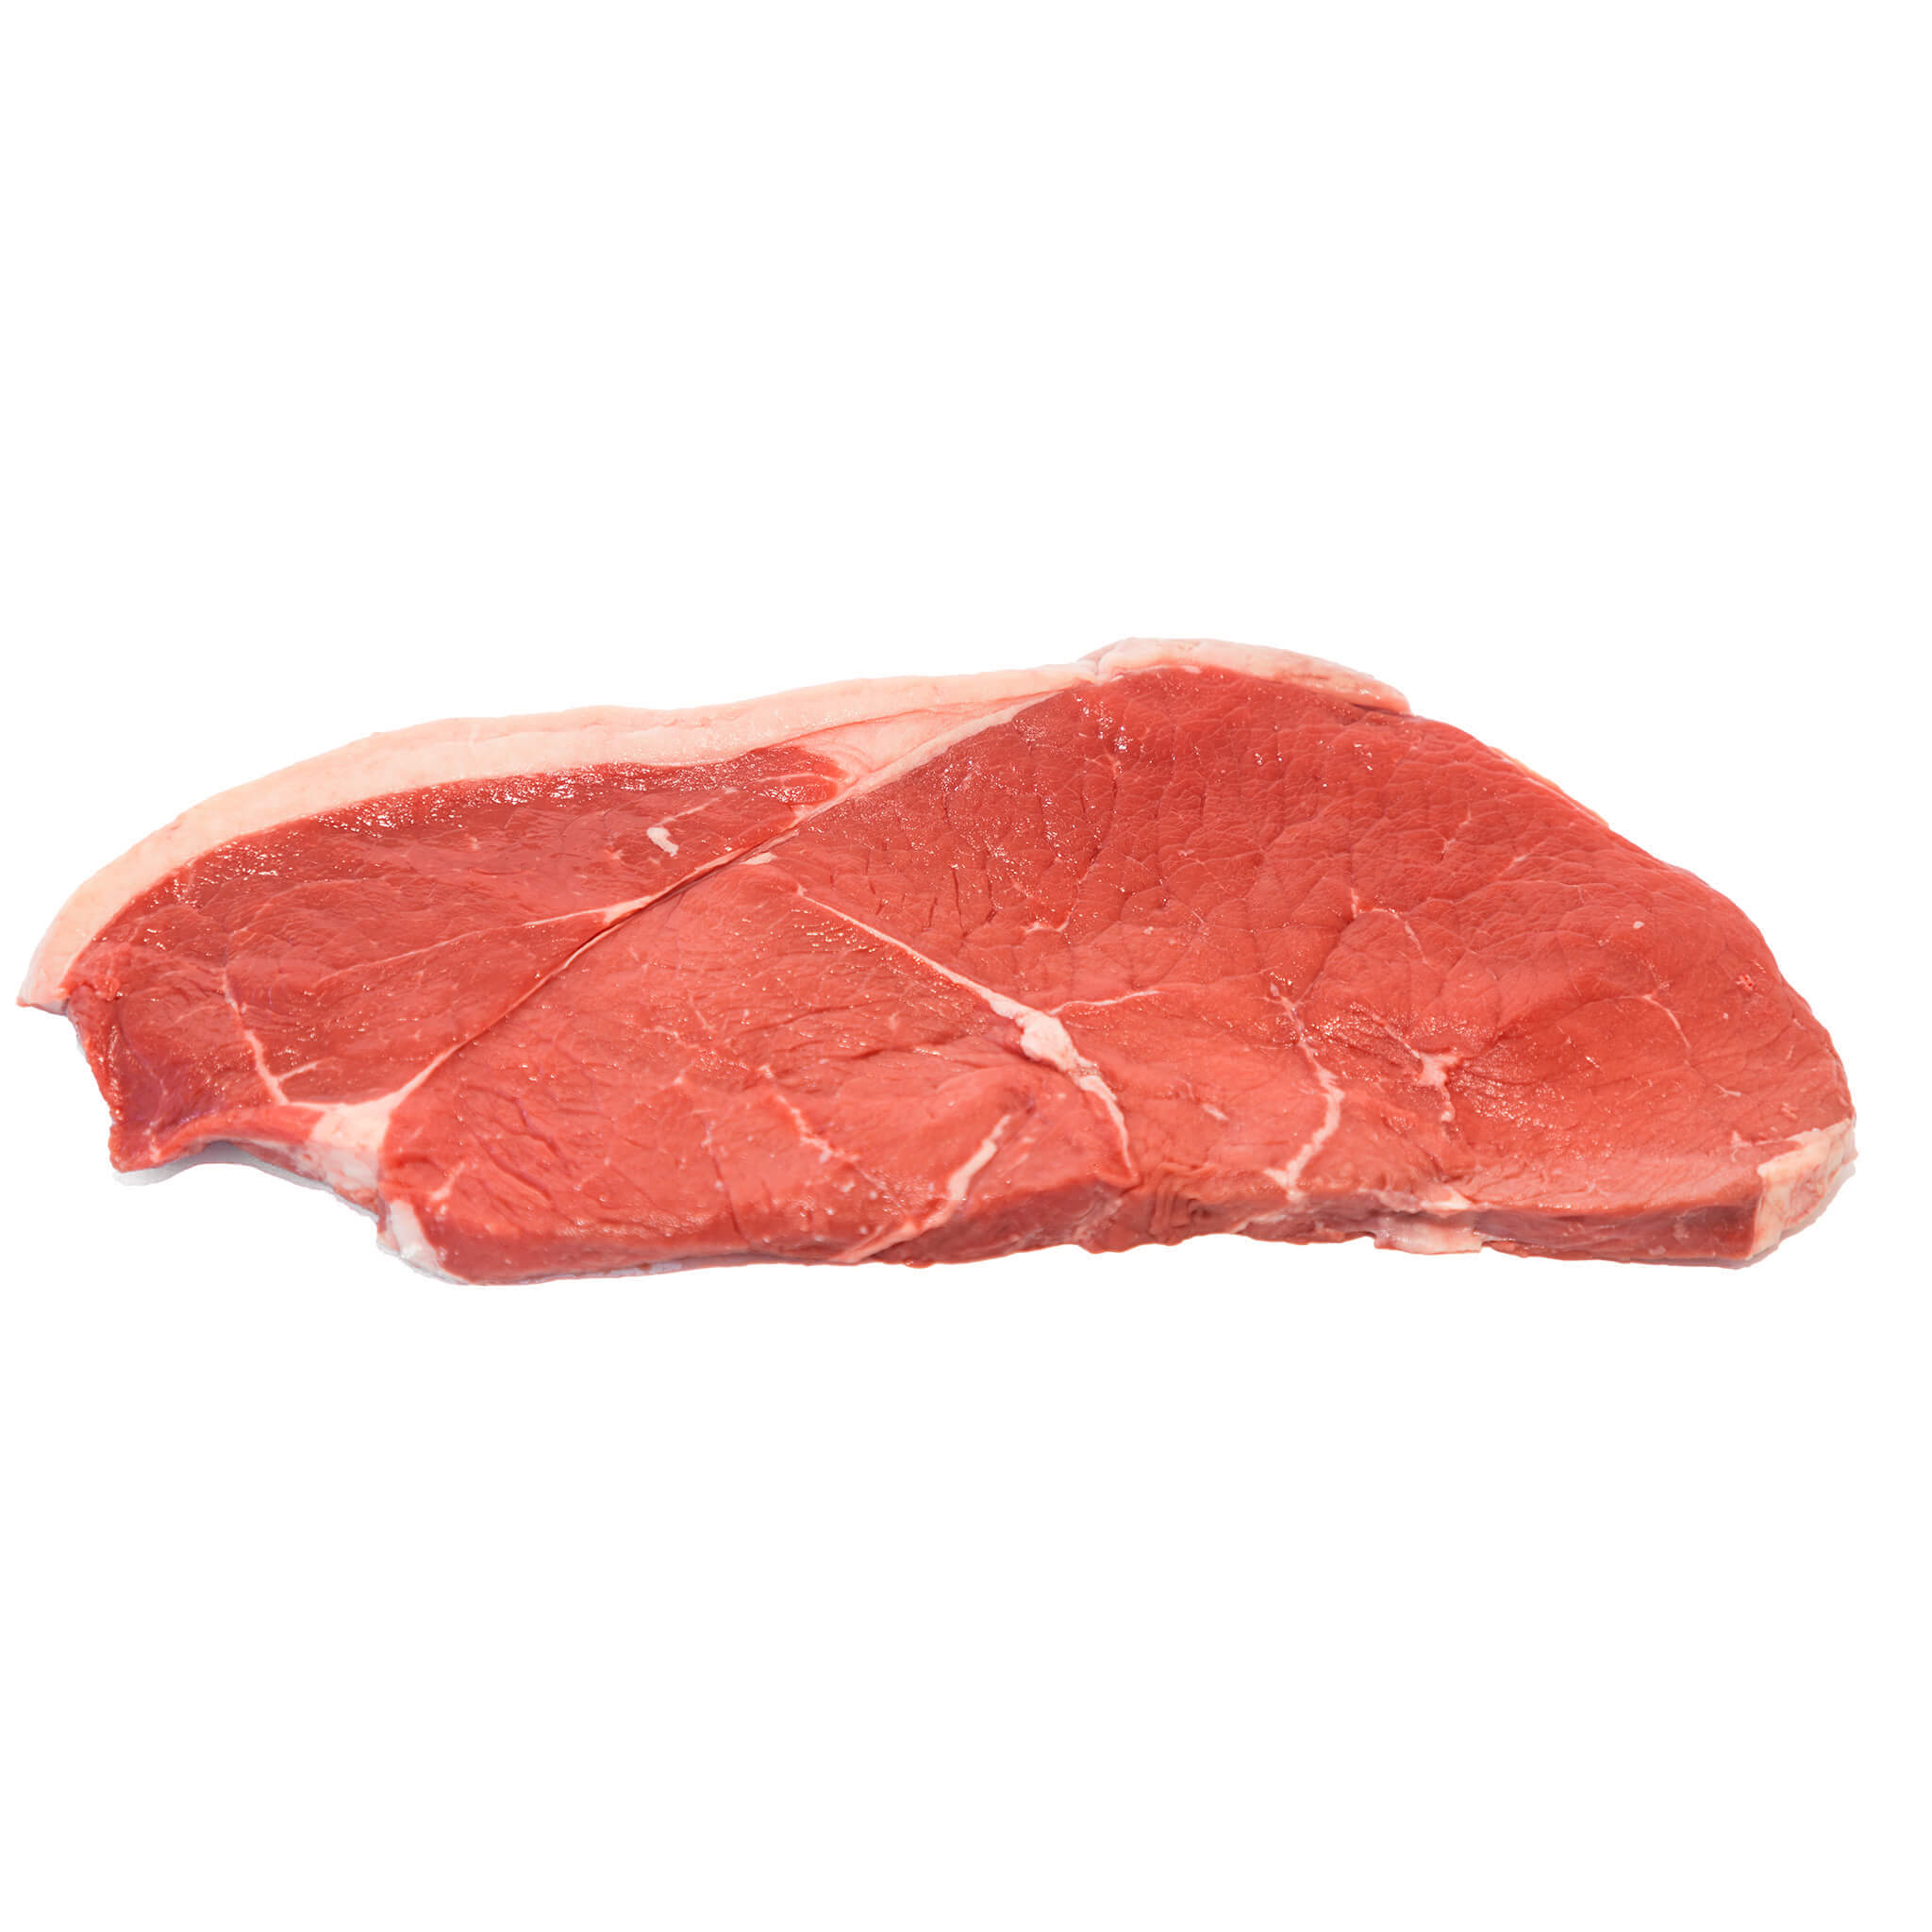 Gram yearling grass fed Beef rump steak for delivery at steve costi seafood